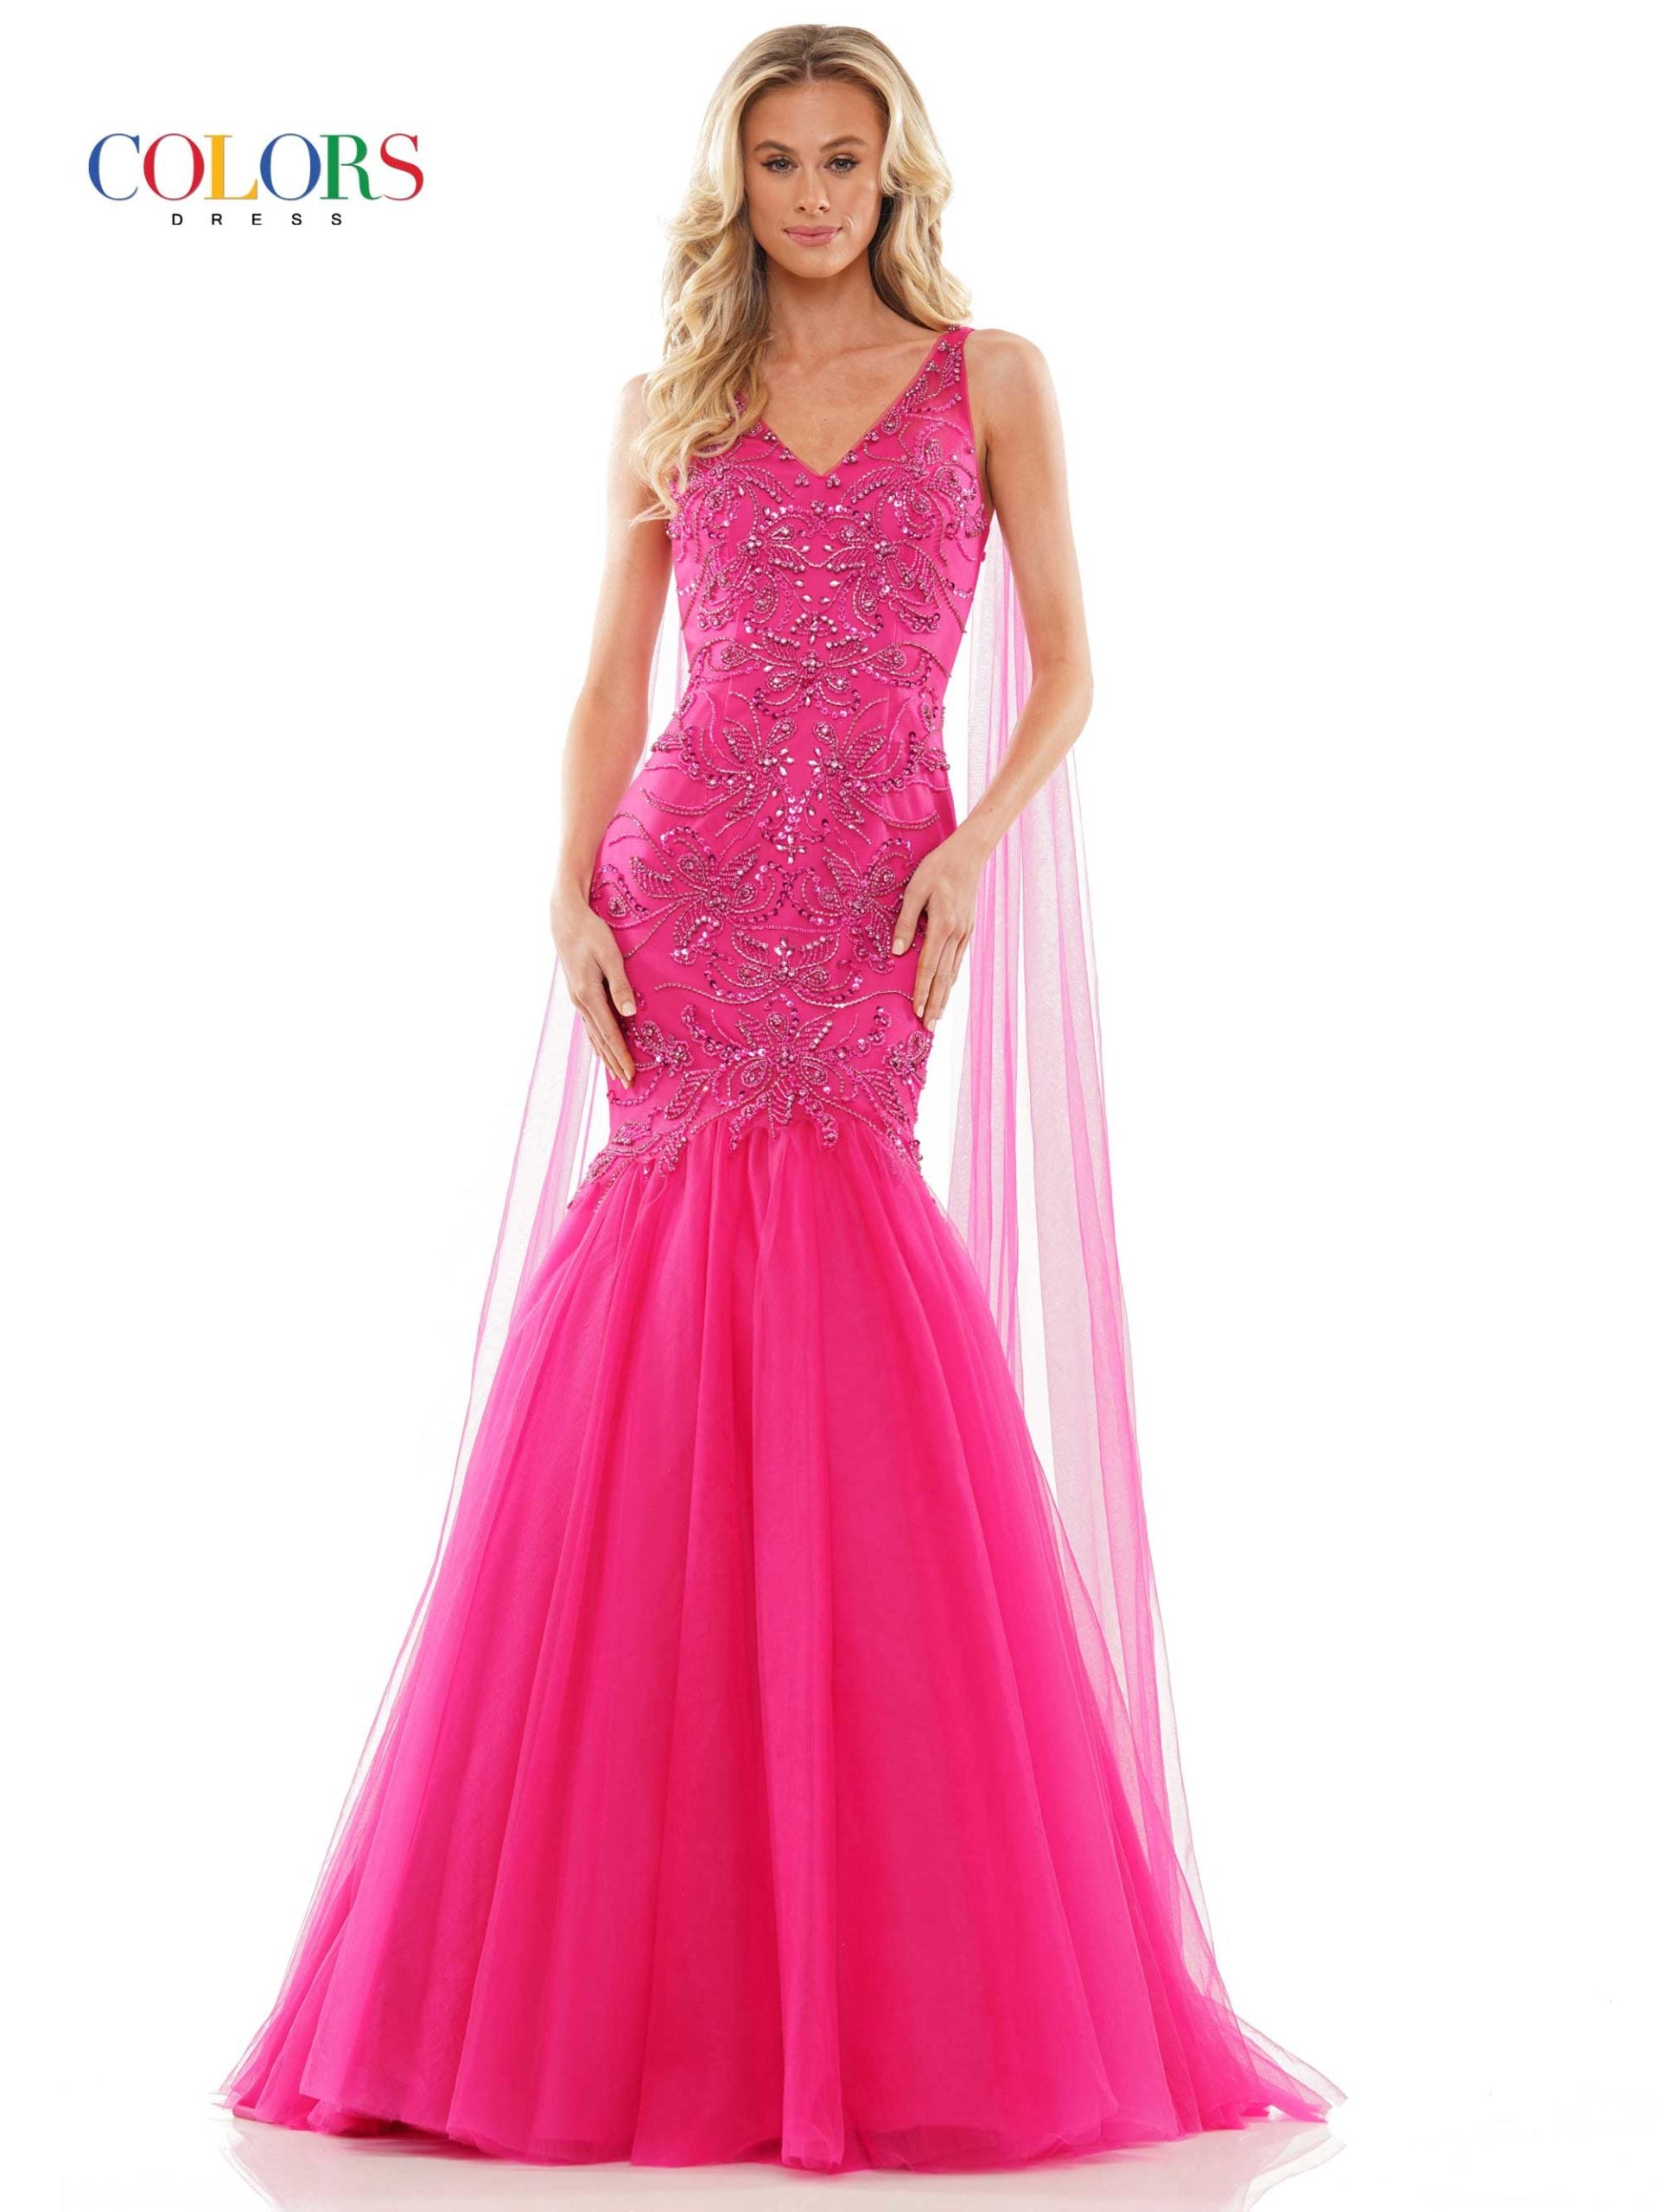 Colors Dress 2993 Mermaid Prom Dress with Capes 47"beaded mesh mermaid dress with V-neck, lace-up on back,  hot pink